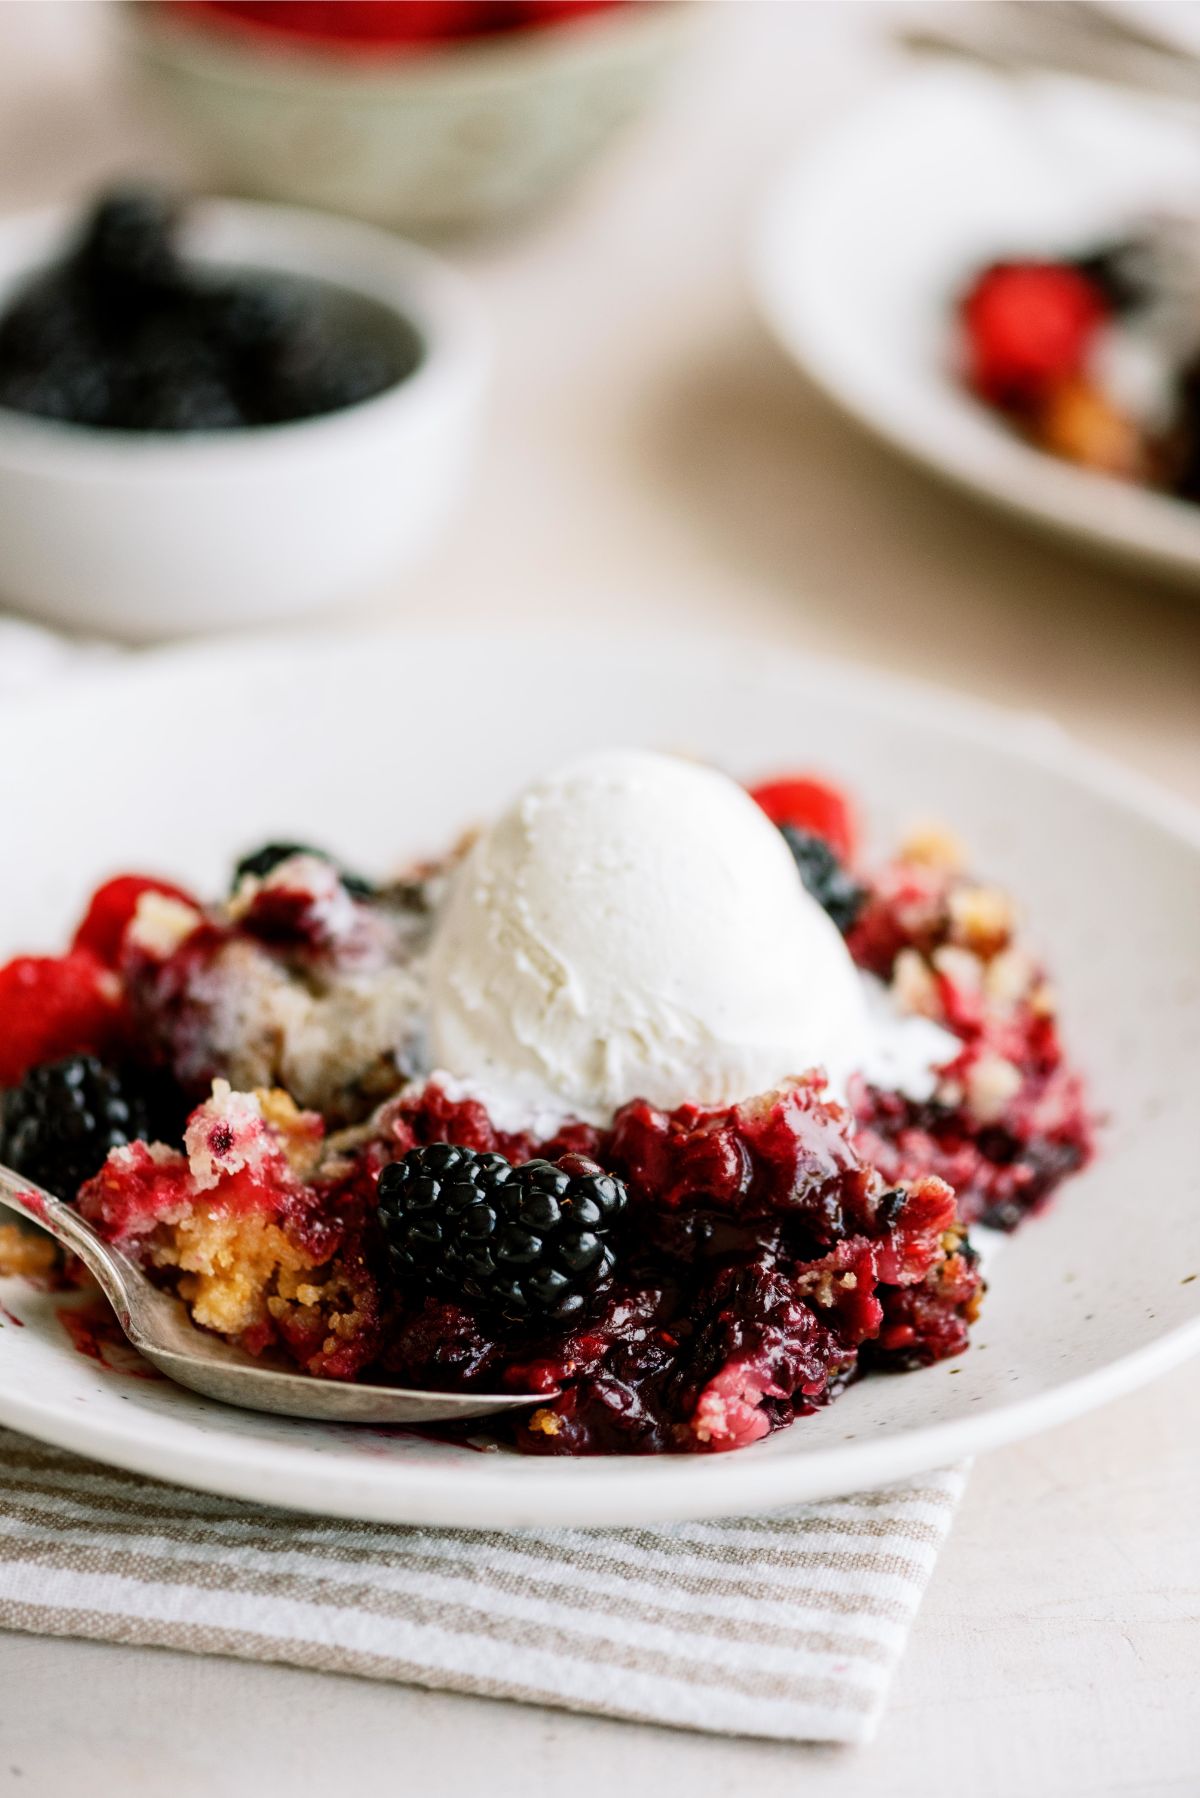 A serving of Slow Cooker Berry Cobbler on a plate topped with ice cream